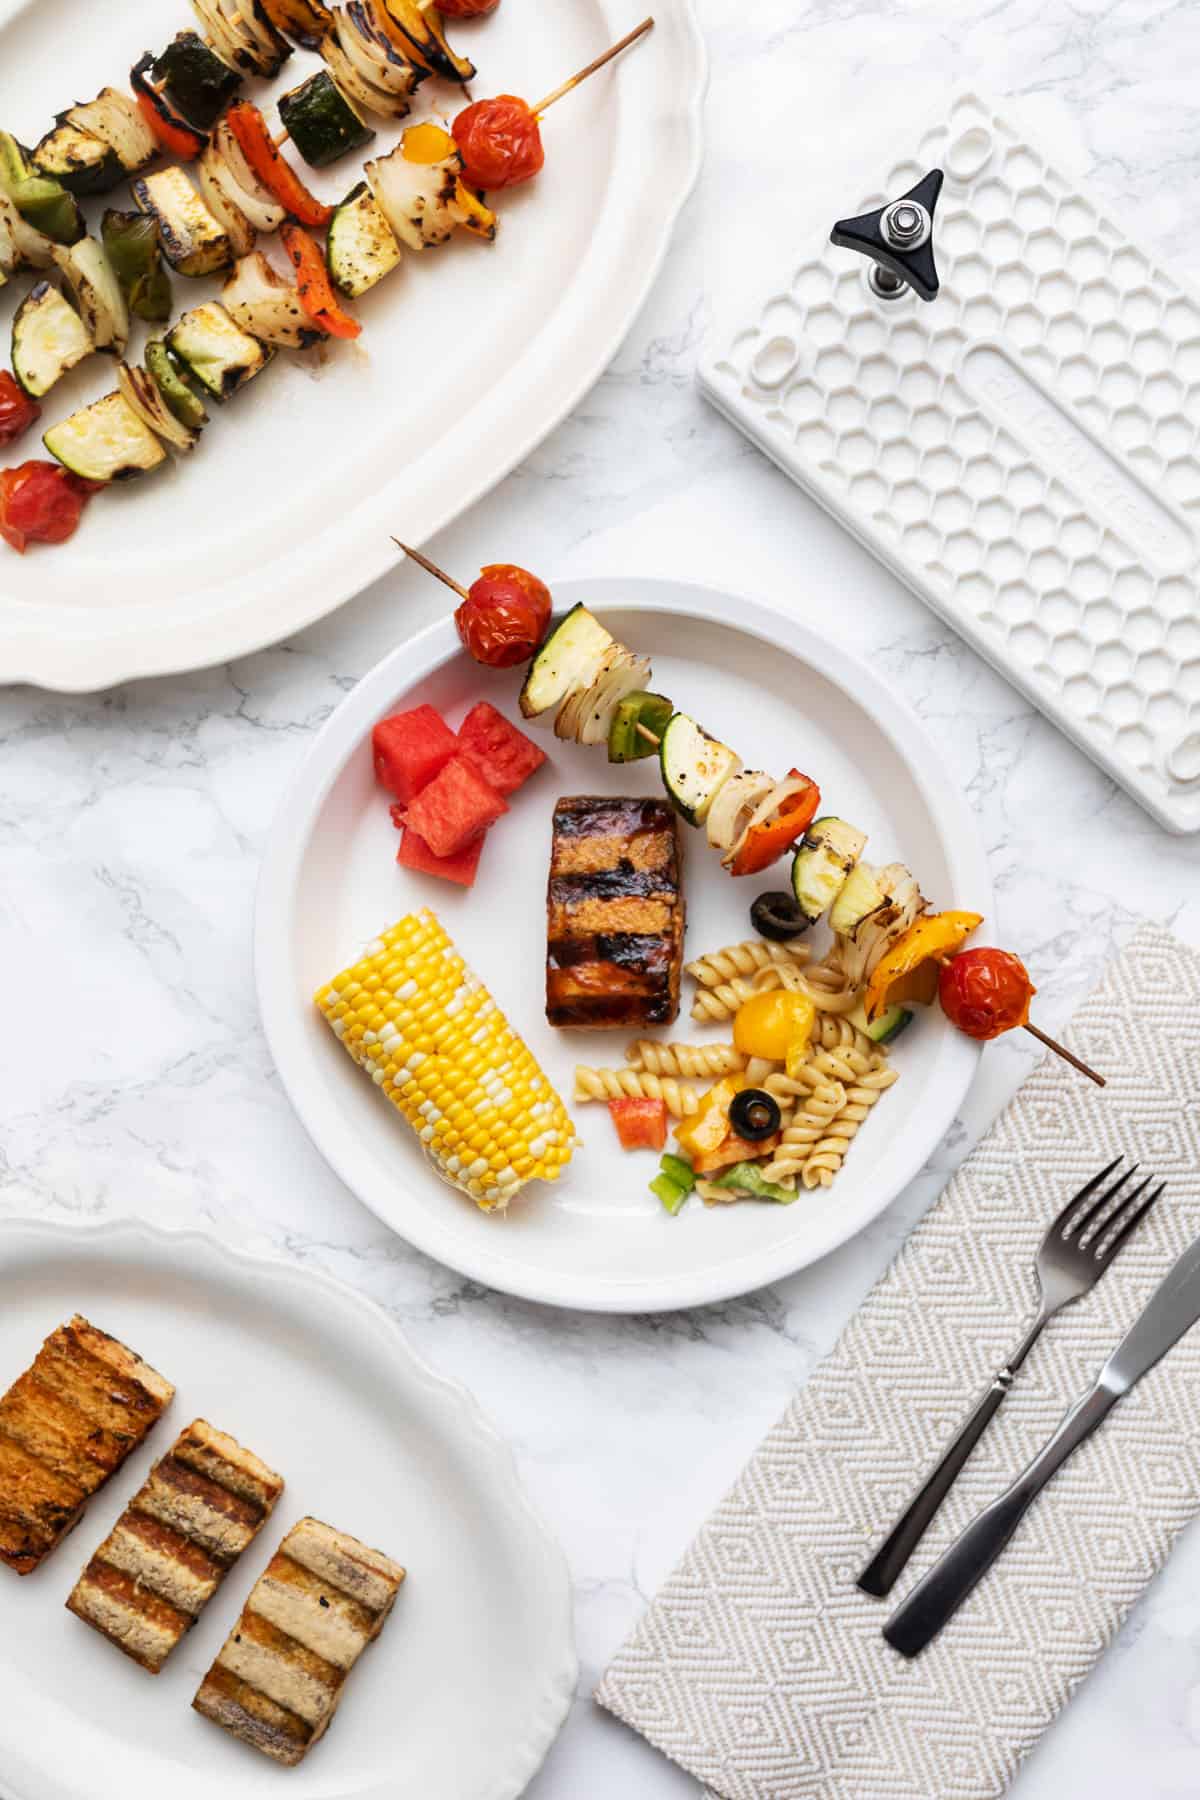 Plate with BBQ grilled tofu, vegetable skewer, pasta salad, corn on the cob, and watermelon with plates of food and place settings